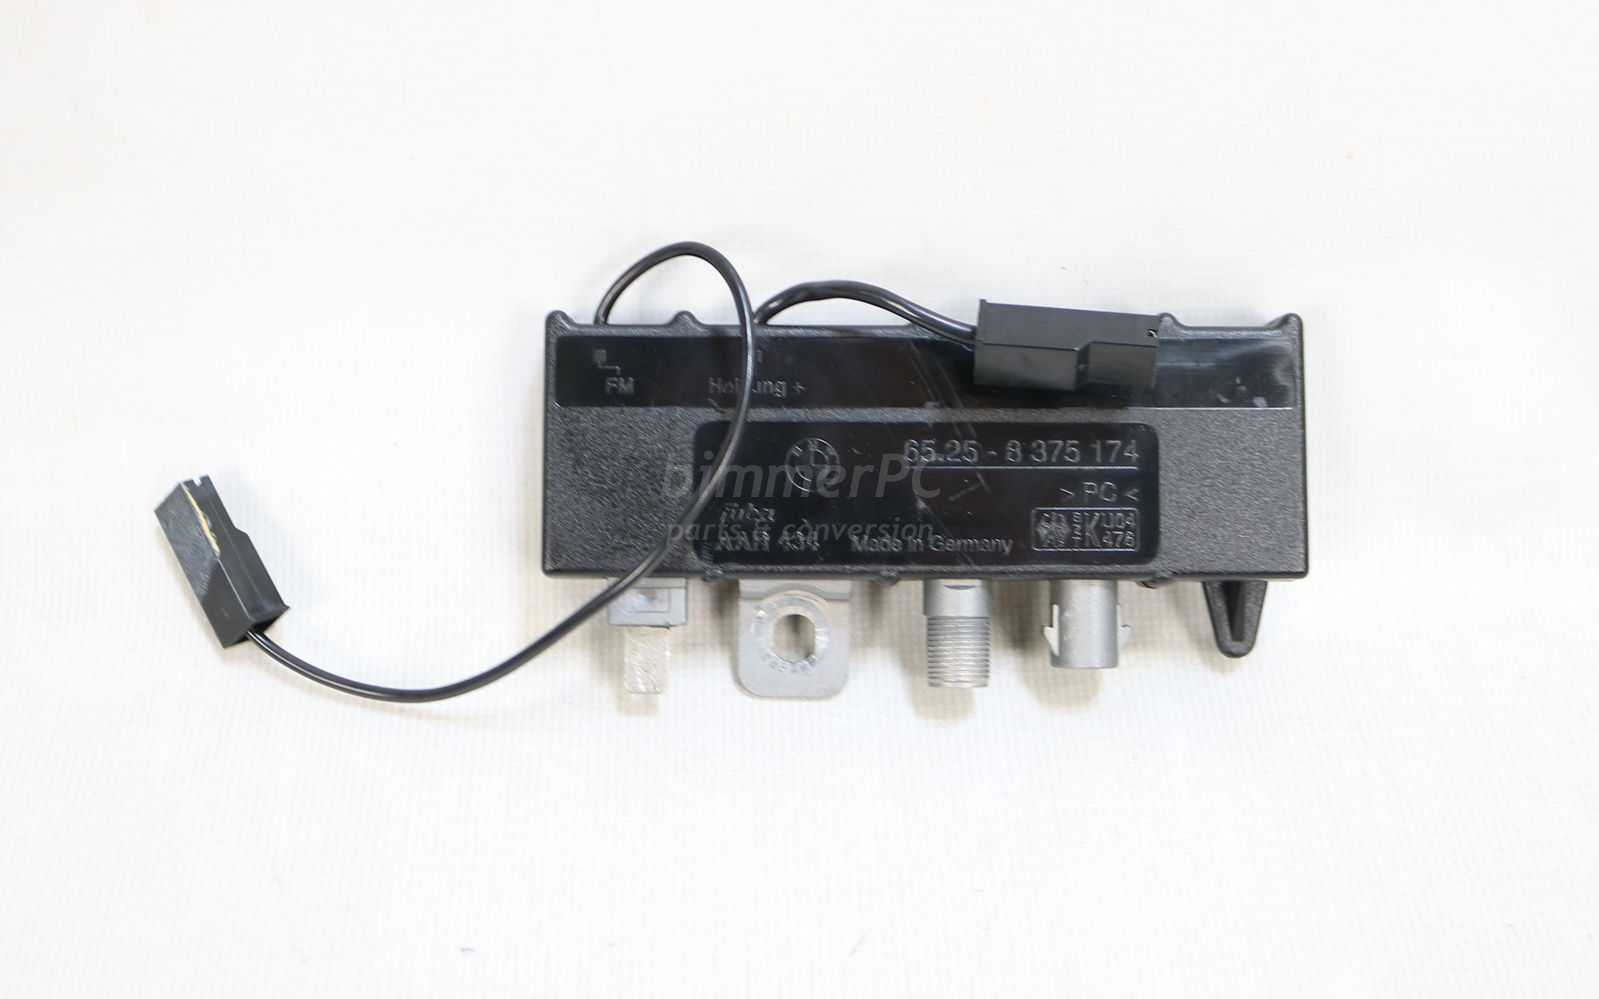 Picture of BMW 65258375174 Radio Antenna Amplifier Right Side Module Unit Trap Circuit E36 for sale